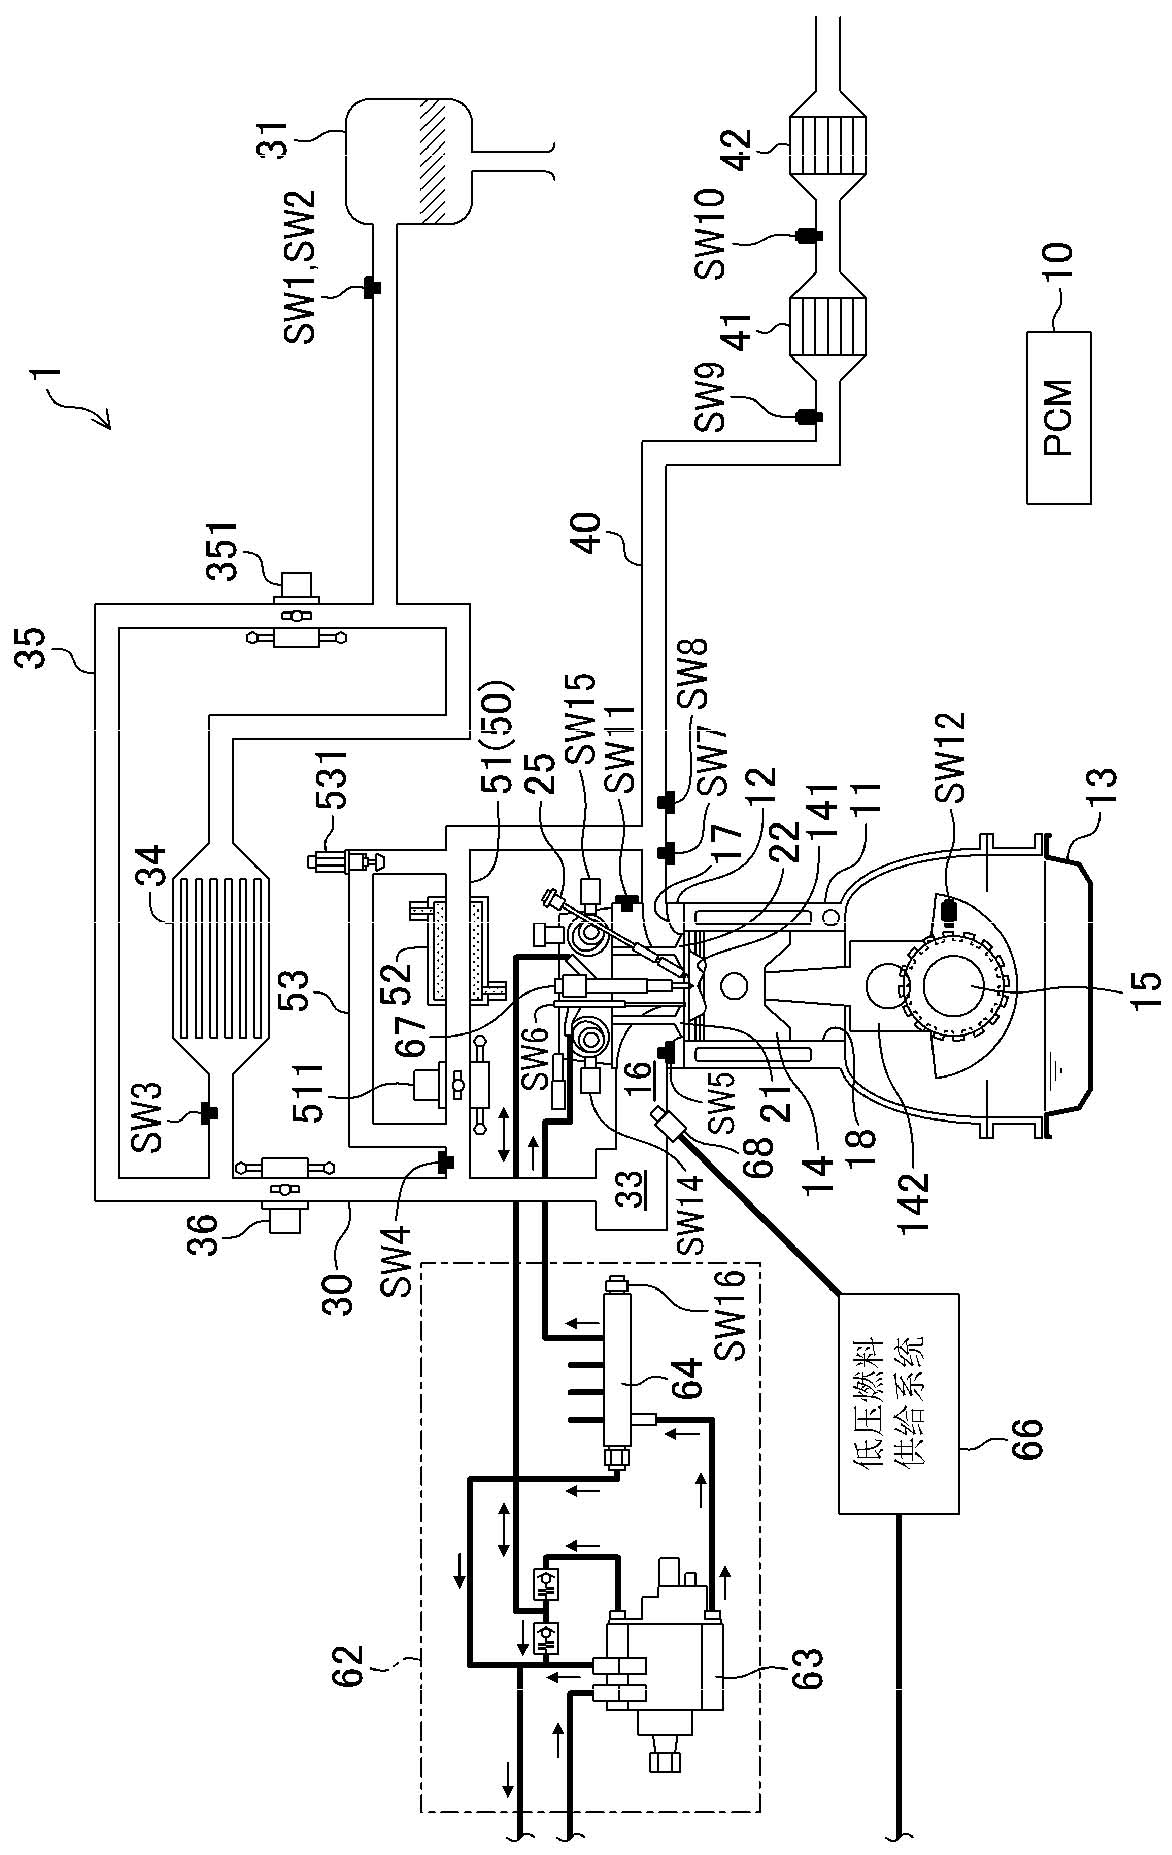 Control device of spark-ignition gasoline engine